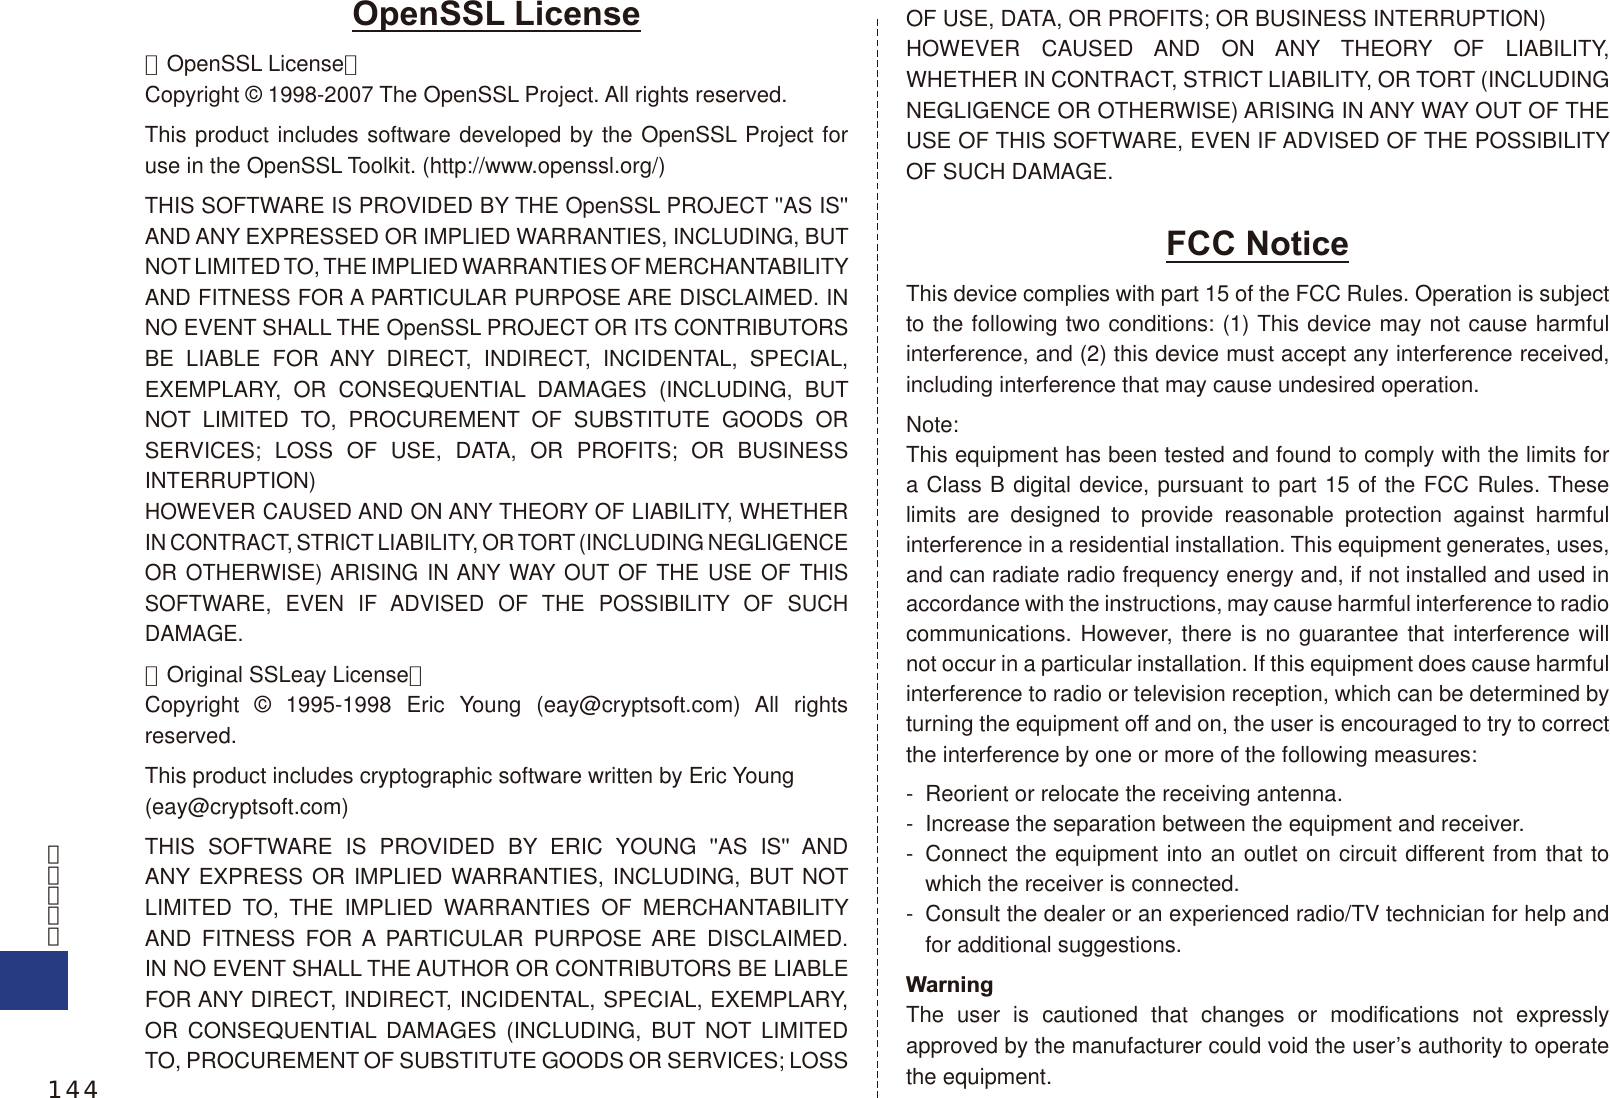 OpenSSL License【OpenSSL License】Copyright © 1998-2007 The OpenSSL Project. All rights reserved.This product includes software developed by the OpenSSL Project for use in the OpenSSL Toolkit. (http://www.openssl.org/)THIS SOFTWARE IS PROVIDED BY THE OpenSSL PROJECT &apos;&apos;AS IS&apos;&apos; AND ANY EXPRESSED OR IMPLIED WARRANTIES, INCLUDING, BUT NOT LIMITED TO, THE IMPLIED WARRANTIES OF MERCHANTABILITY AND FITNESS FOR A PARTICULAR PURPOSE ARE DISCLAIMED. IN NO EVENT SHALL THE OpenSSL PROJECT OR ITS CONTRIBUTORS BE LIABLE FOR ANY DIRECT, INDIRECT, INCIDENTAL, SPECIAL, EXEMPLARY, OR CONSEQUENTIAL DAMAGES (INCLUDING, BUT NOT LIMITED TO, PROCUREMENT OF SUBSTITUTE GOODS OR SERVICES; LOSS OF USE, DATA, OR PROFITS; OR BUSINESS INTERRUPTION)HOWEVER CAUSED AND ON ANY THEORY OF LIABILITY, WHETHER IN CONTRACT, STRICT LIABILITY, OR TORT (INCLUDING NEGLIGENCE OR OTHERWISE) ARISING IN ANY WAY OUT OF THE USE OF THIS SOFTWARE, EVEN IF ADVISED OF THE POSSIBILITY OF SUCH DAMAGE.【Original SSLeay License】Copyright © 1995-1998 Eric Young (eay@cryptsoft.com) All rights reserved.This product includes cryptographic software written by Eric Young(eay@cryptsoft.com)THIS SOFTWARE IS PROVIDED BY ERIC YOUNG &apos;&apos;AS IS&apos;&apos; AND ANY EXPRESS OR IMPLIED WARRANTIES, INCLUDING, BUT NOT LIMITED TO, THE IMPLIED WARRANTIES OF MERCHANTABILITY AND FITNESS FOR A PARTICULAR PURPOSE ARE DISCLAIMED. IN NO EVENT SHALL THE AUTHOR OR CONTRIBUTORS BE LIABLE FOR ANY DIRECT, INDIRECT, INCIDENTAL, SPECIAL, EXEMPLARY, OR CONSEQUENTIAL DAMAGES (INCLUDING, BUT NOT LIMITED TO, PROCUREMENT OF SUBSTITUTE GOODS OR SERVICES; LOSS OF USE, DATA, OR PROFITS; OR BUSINESS INTERRUPTION)HOWEVER CAUSED AND ON ANY THEORY OF LIABILITY, WHETHER IN CONTRACT, STRICT LIABILITY, OR TORT (INCLUDING NEGLIGENCE OR OTHERWISE) ARISING IN ANY WAY OUT OF THE USE OF THIS SOFTWARE, EVEN IF ADVISED OF THE POSSIBILITY OF SUCH DAMAGE.FCC NoticeThis device complies with part 15 of the FCC Rules. Operation is subject to the following two conditions: (1) This device may not cause harmful interference, and (2) this device must accept any interference received, including interference that may cause undesired operation.Note:This equipment has been tested and found to comply with the limits for a Class B digital device, pursuant to part 15 of the FCC Rules. These limits are designed to provide reasonable protection against harmful interference in a residential installation. This equipment generates, uses, and can radiate radio frequency energy and, if not installed and used in accordance with the instructions, may cause harmful interference to radio communications. However, there is no guarantee that interference will not occur in a particular installation. If this equipment does cause harmful interference to radio or television reception, which can be determined by turning the equipment off and on, the user is encouraged to try to correct the interference by one or more of the following measures:-  Reorient or relocate the receiving antenna.-  Increase the separation between the equipment and receiver.-  Connect the equipment into an outlet on circuit different from that to which the receiver is connected.-  Consult the dealer or an experienced radio/TV technician for help and for additional suggestions.WarningThe user is cautioned that changes or modifications not expressly approved by the manufacturer could void the user’s authority to operate the equipment.144